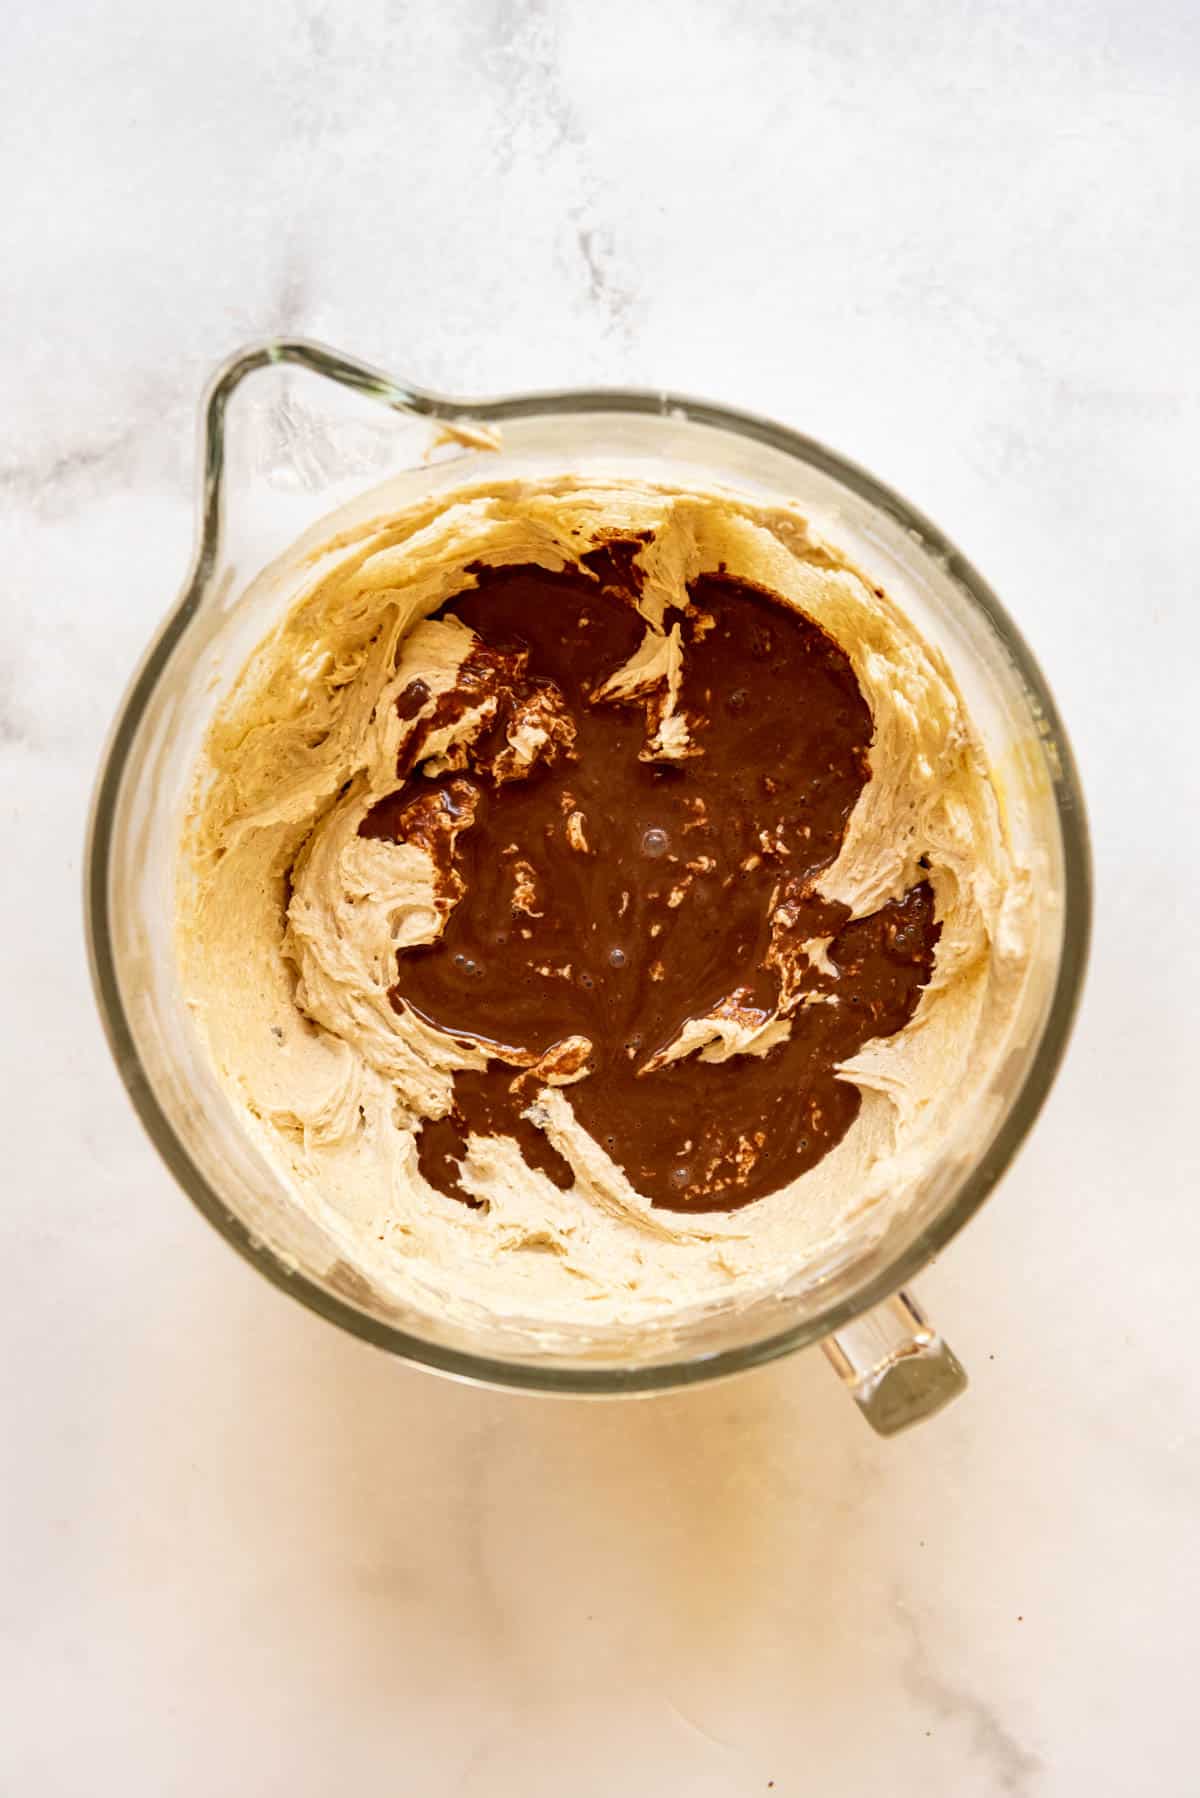 Top view of a glass mixing jug with cake mixture in it and cocoa powder on top.